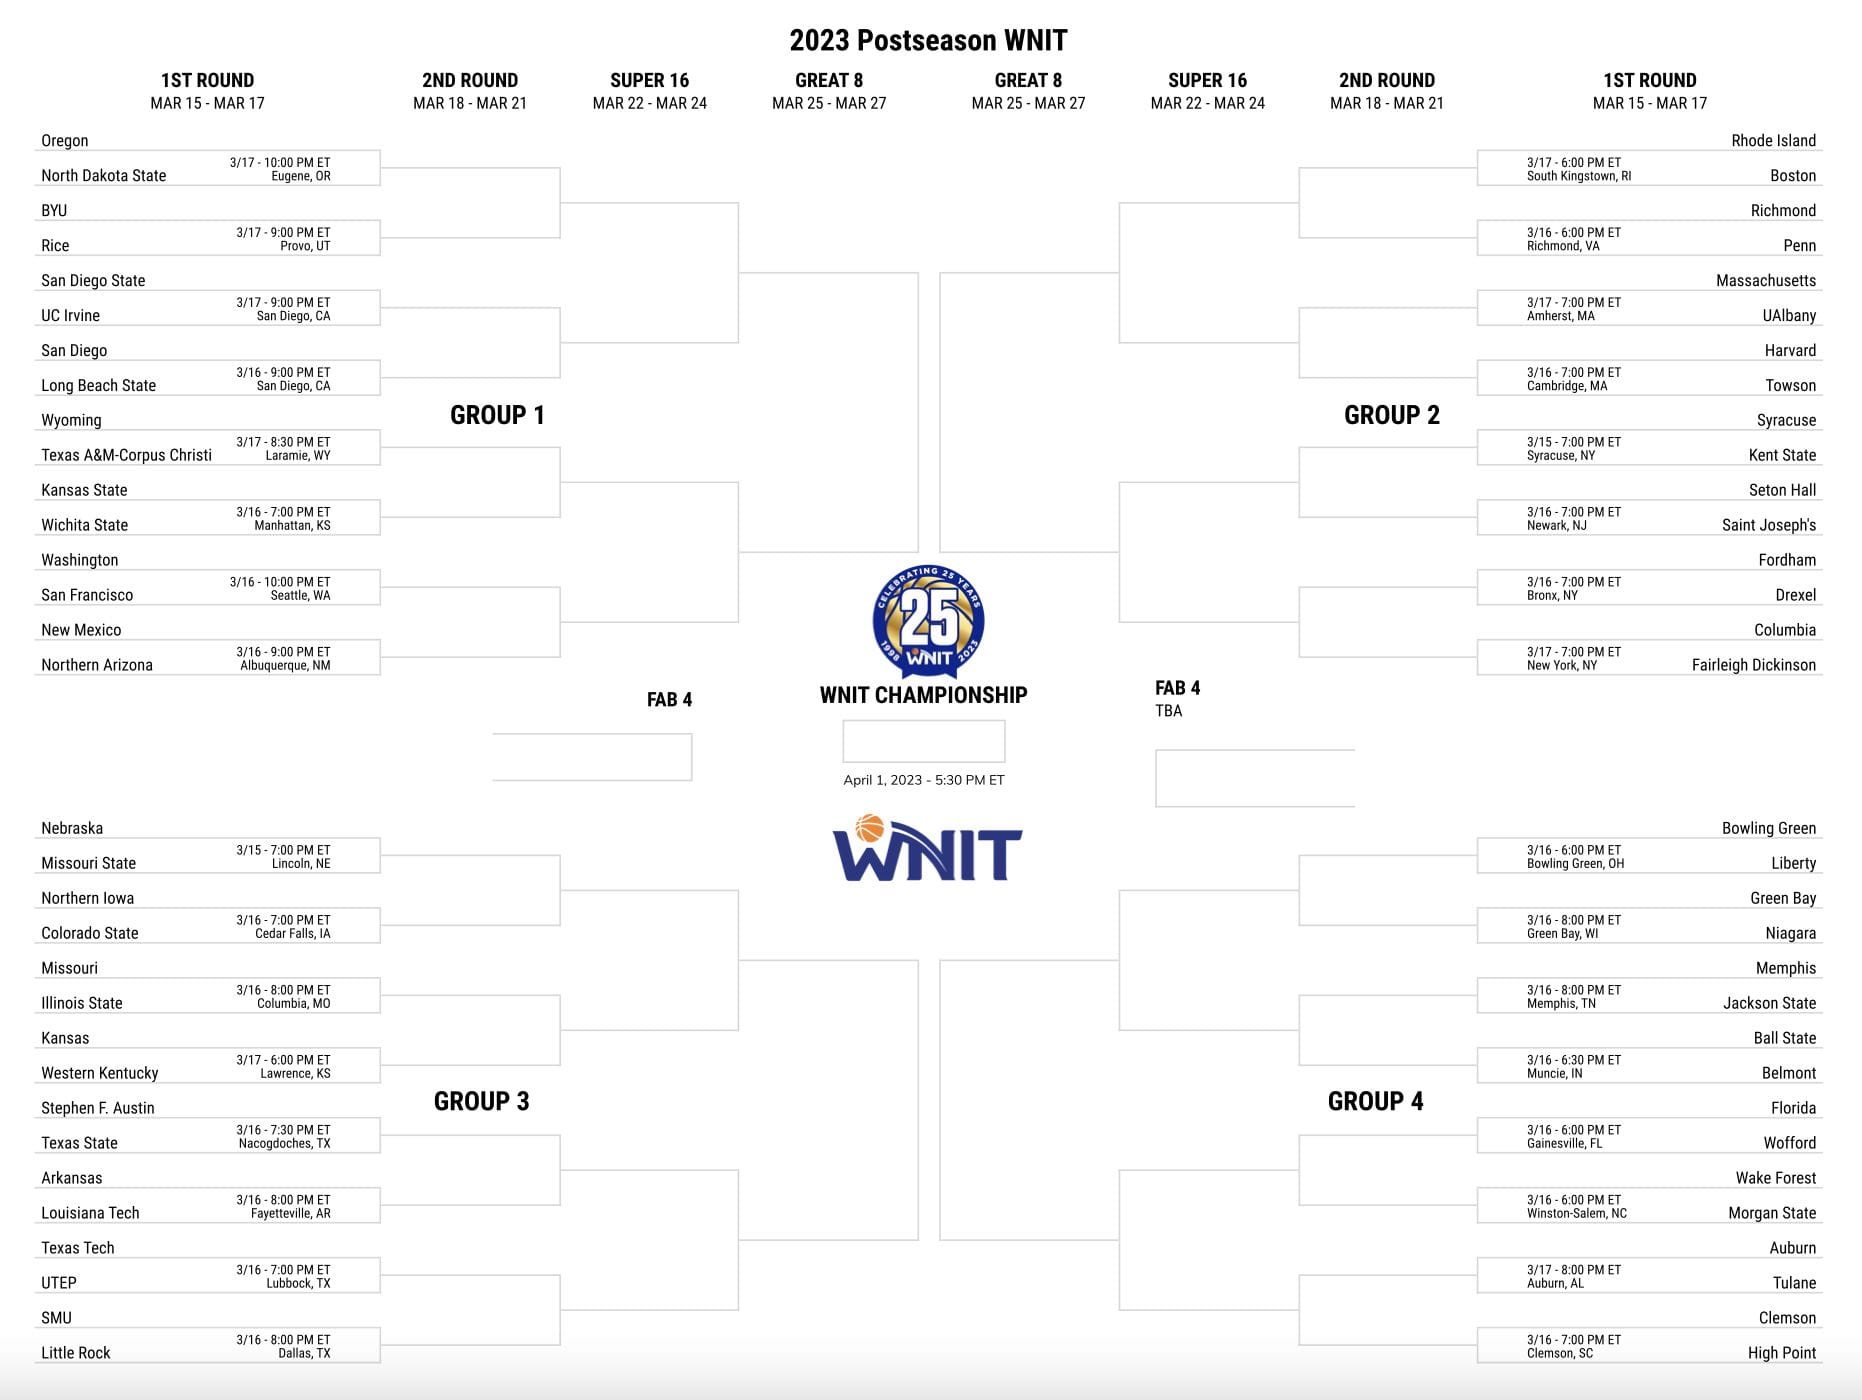 WNIT Bracket, schedule, teams and how to watch the women's tournament